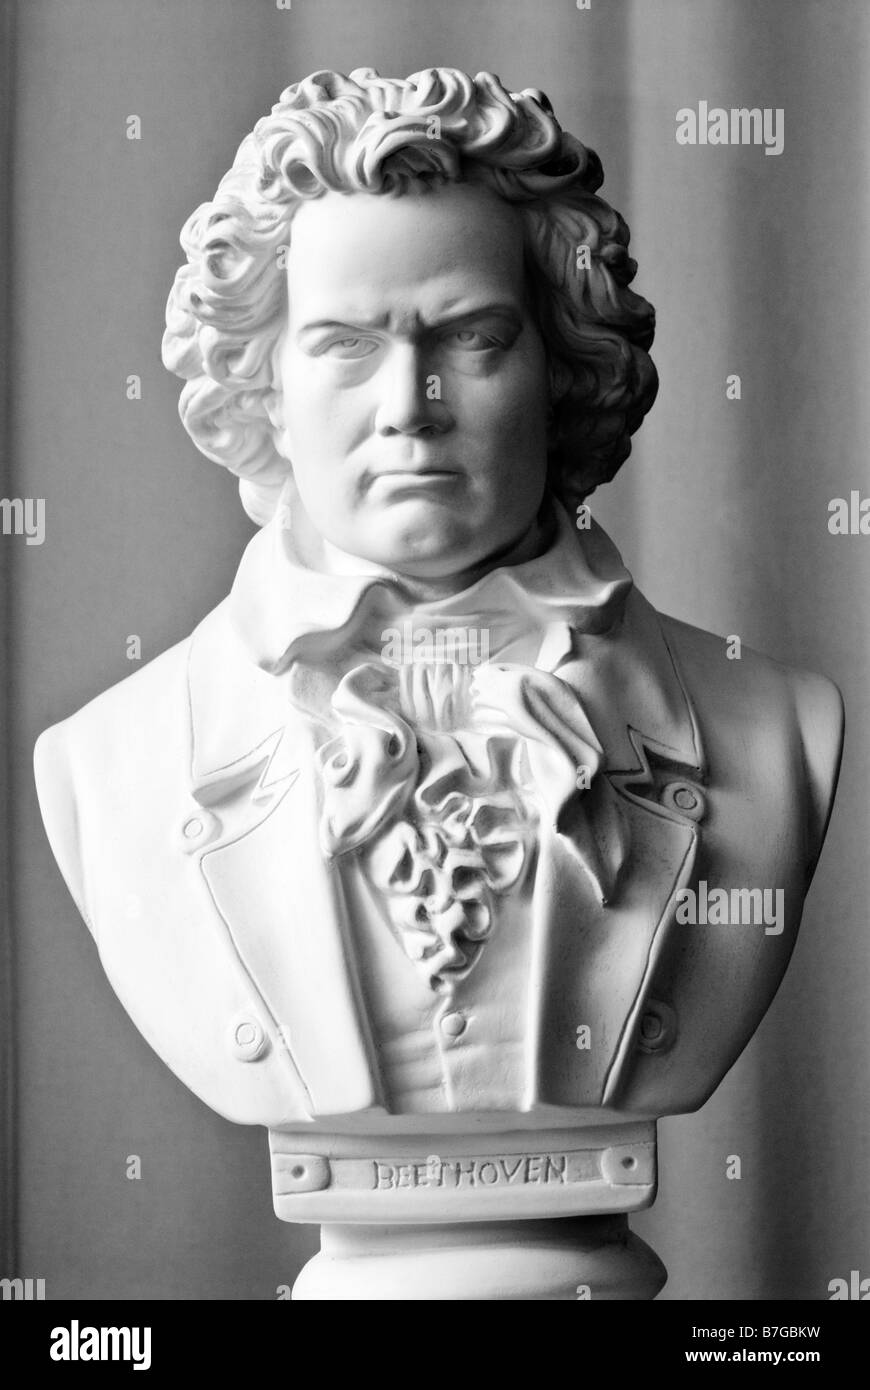 Bust of Beethoven Stock Photo